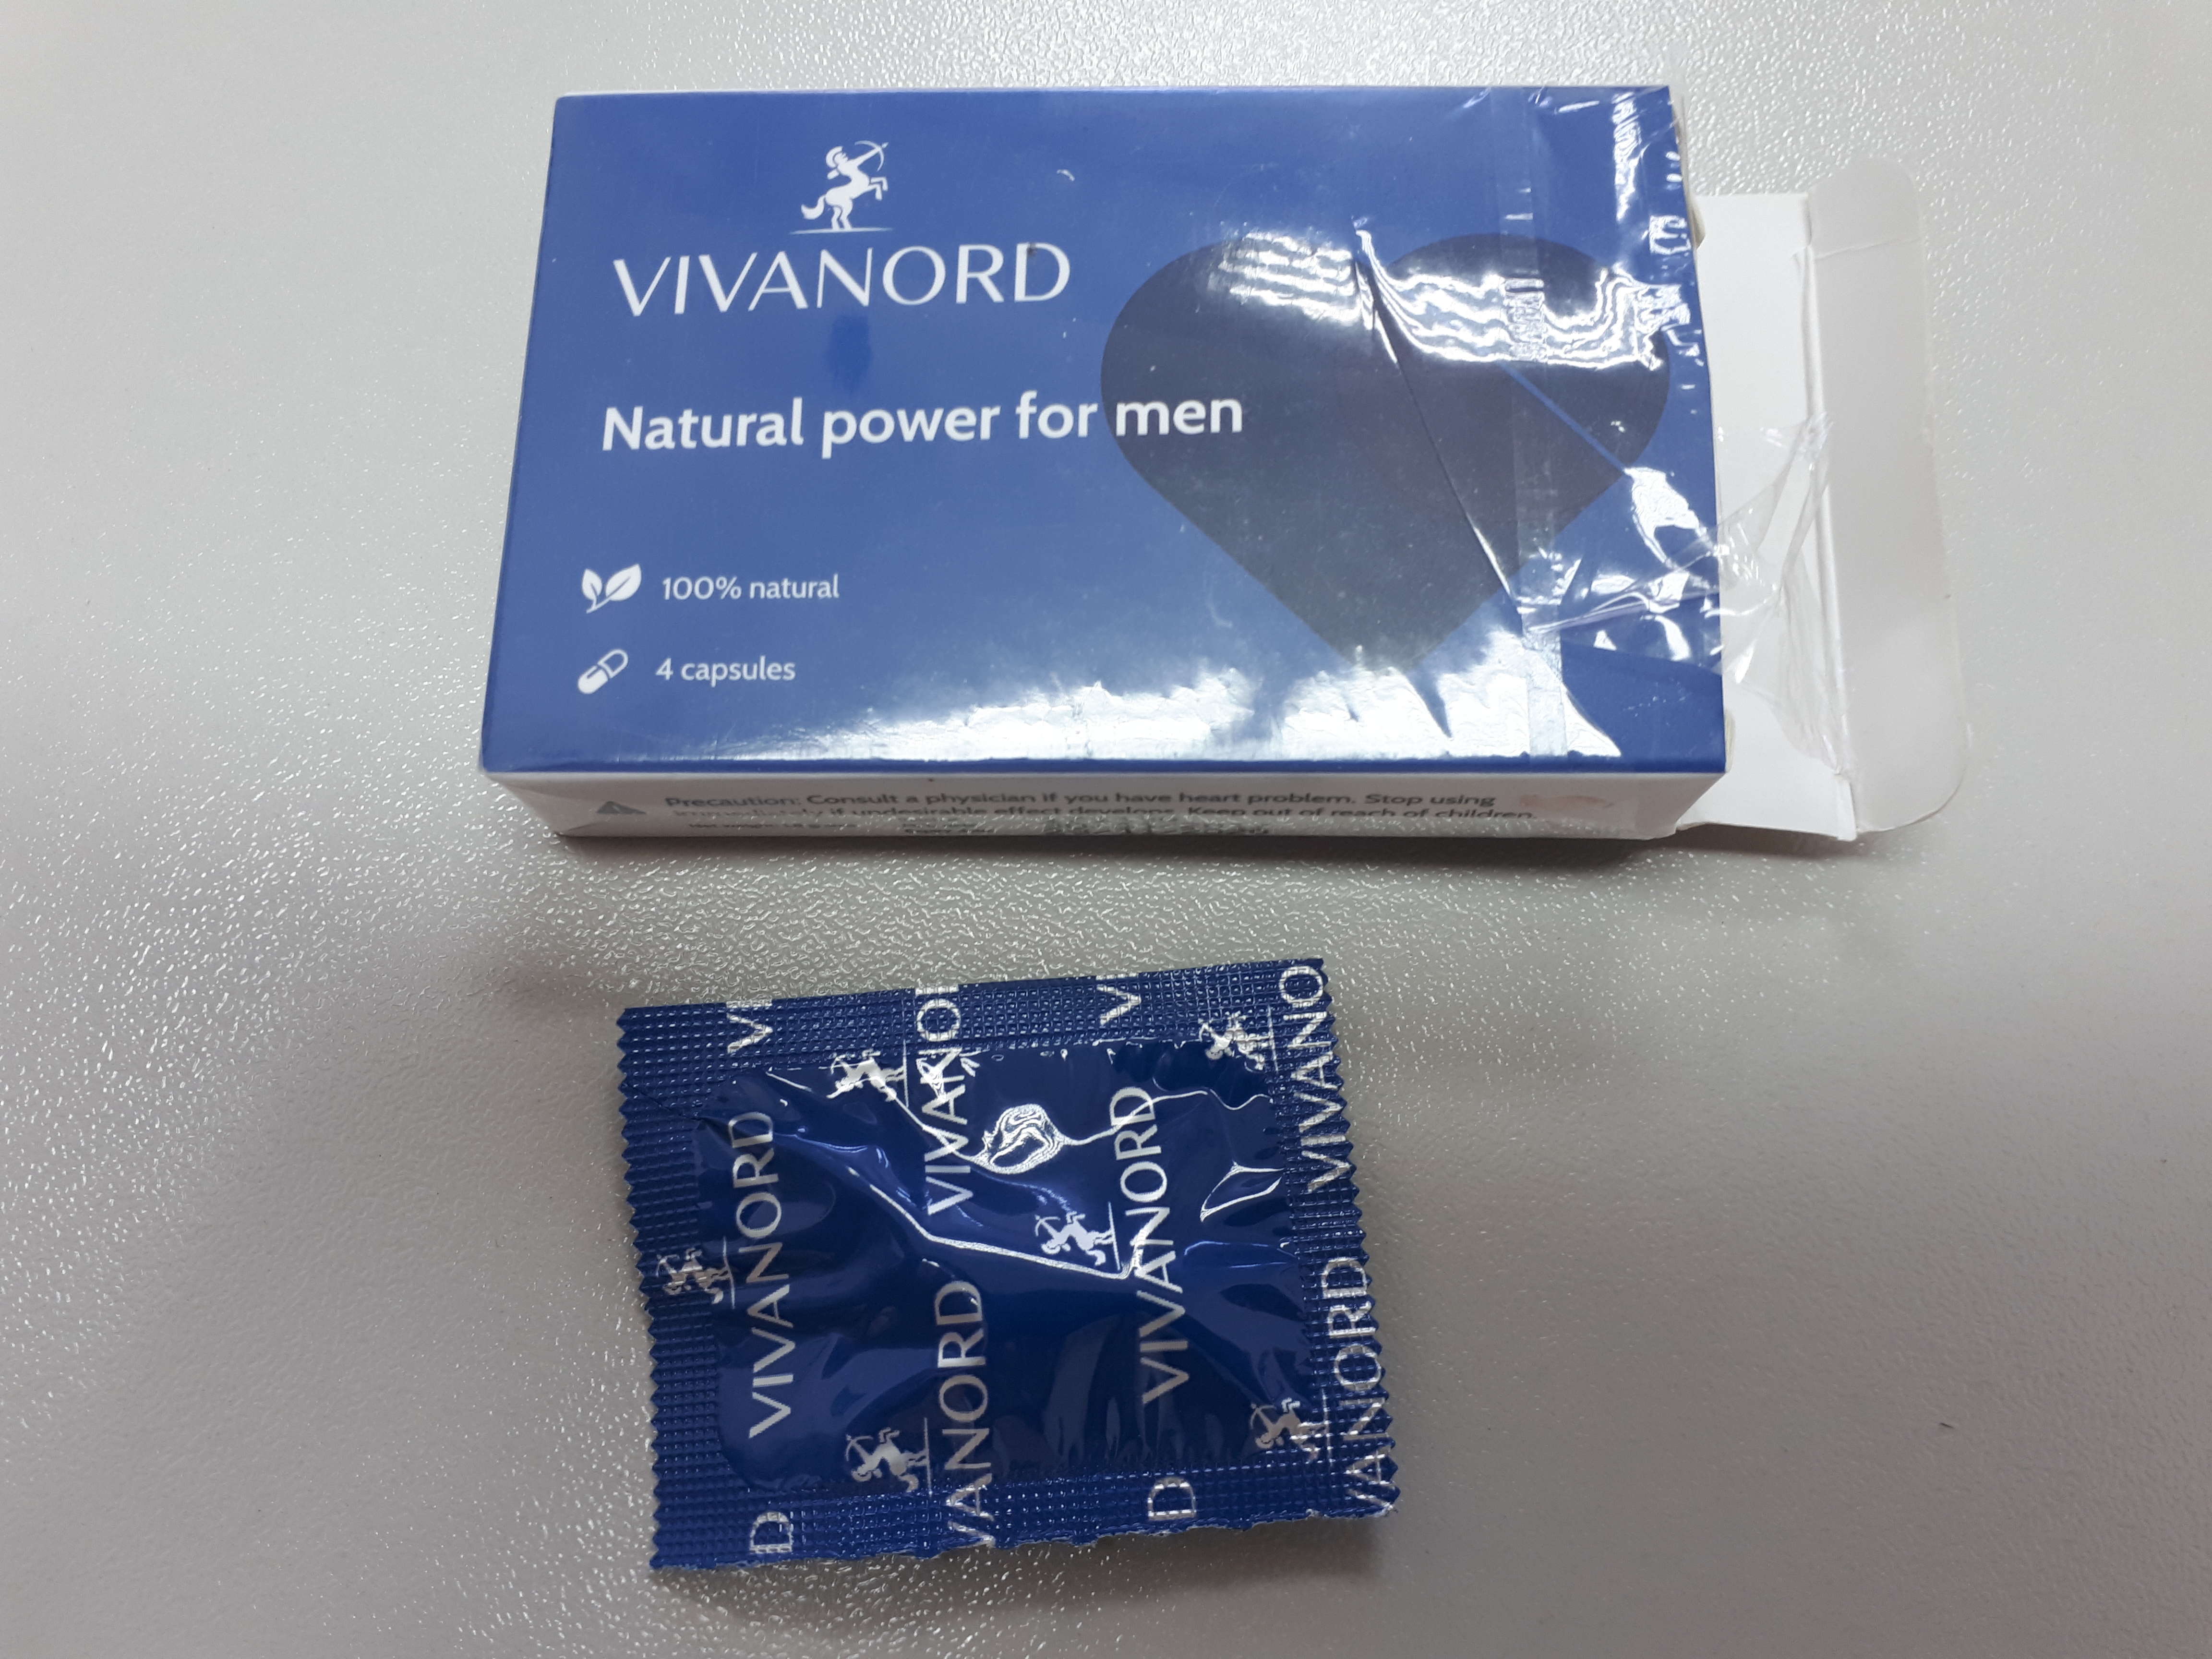 Image of the illigal product: Vivanord Natural Power for Men